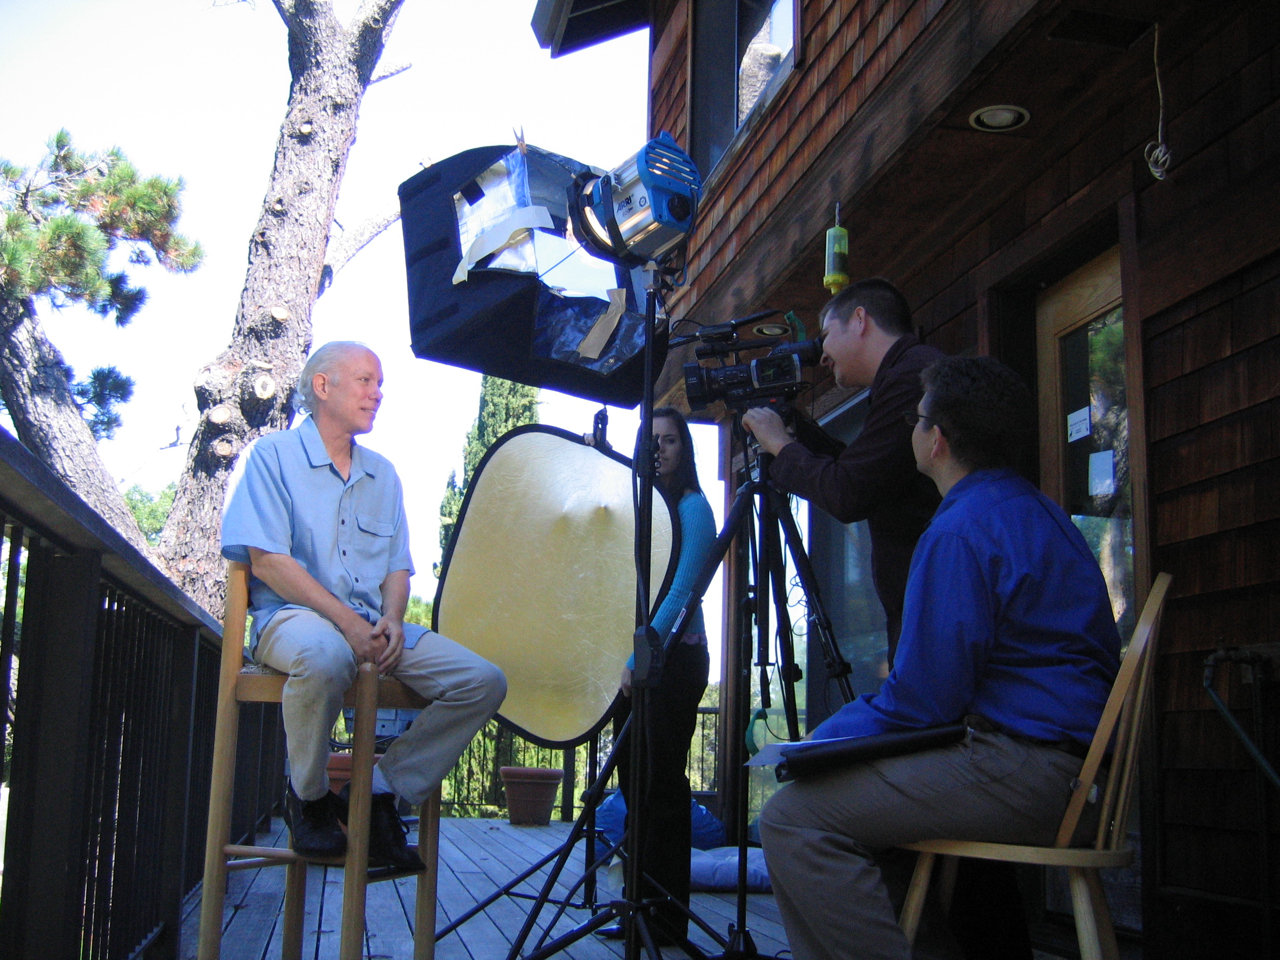 Bill Atkinson being interviewed by Vincent Vittorio in Silicon Valley, California.